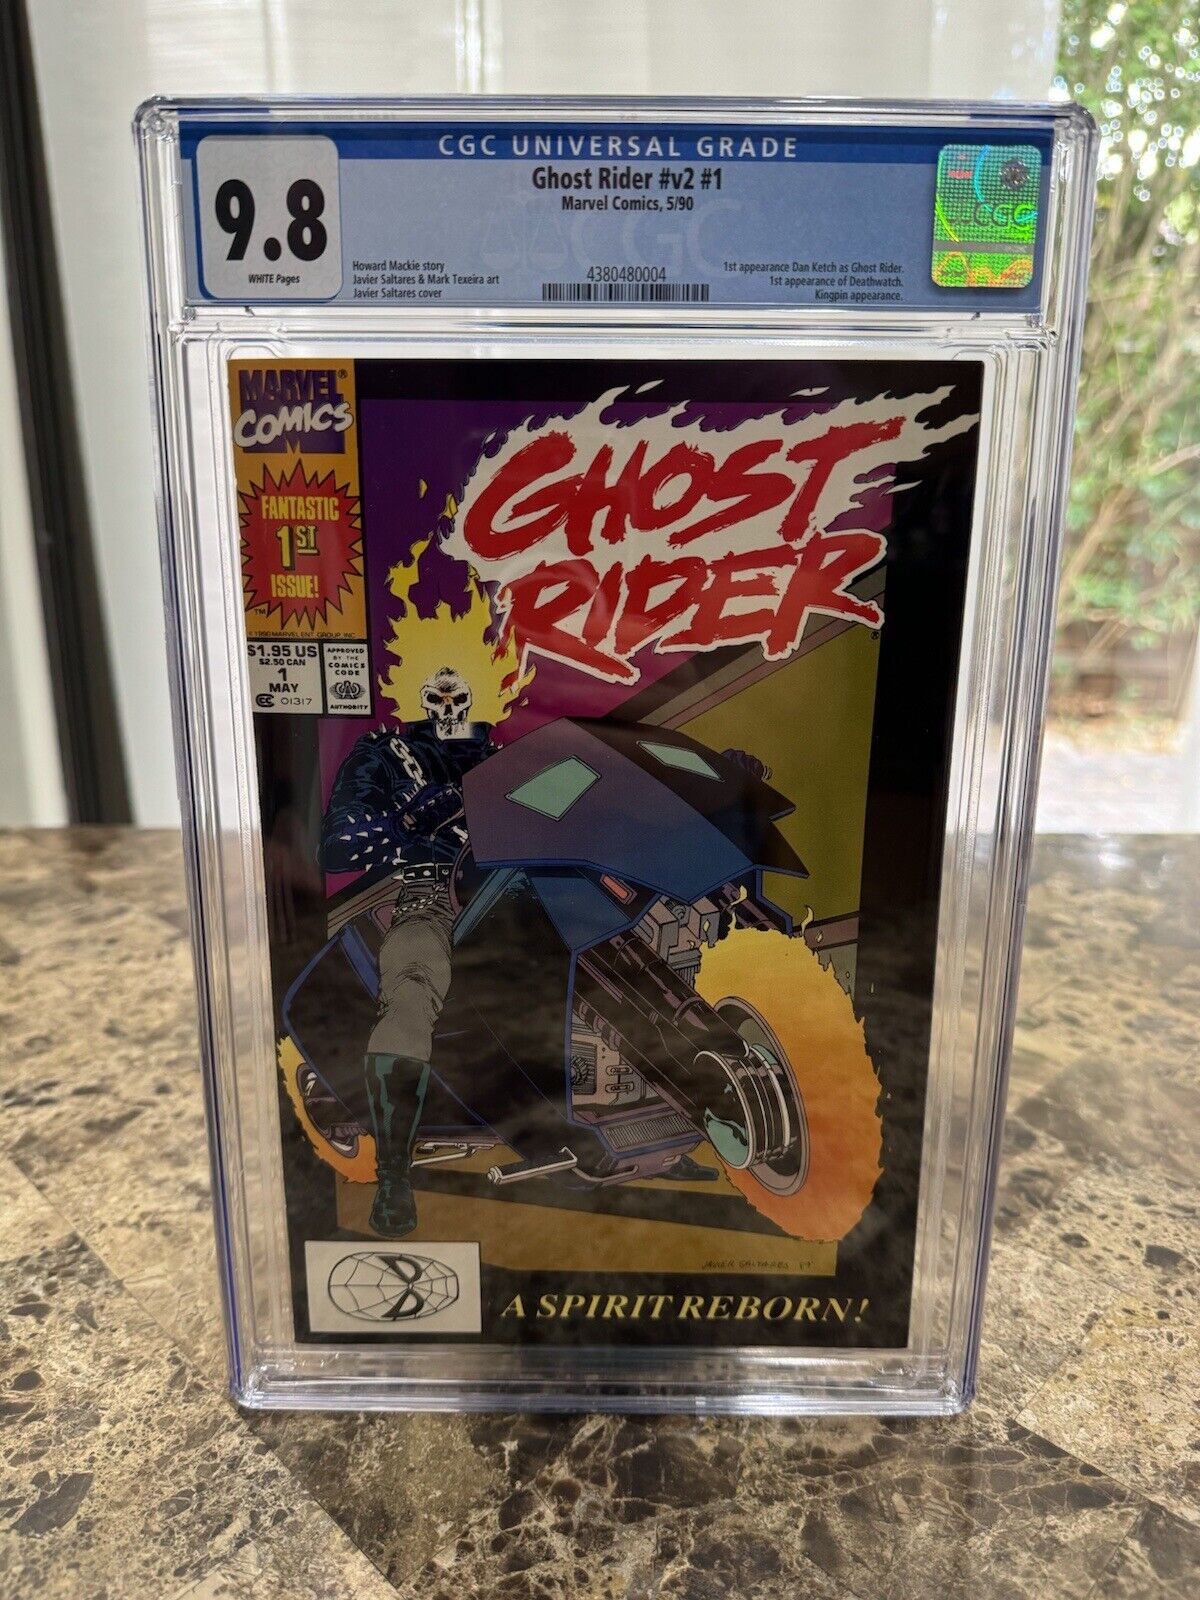 GHOST RIDER V2 #1 (‘90) CGC 9.8- 1ST APP OF DANNY KETCH, WHITE PGS-MIDNIGHT SONS